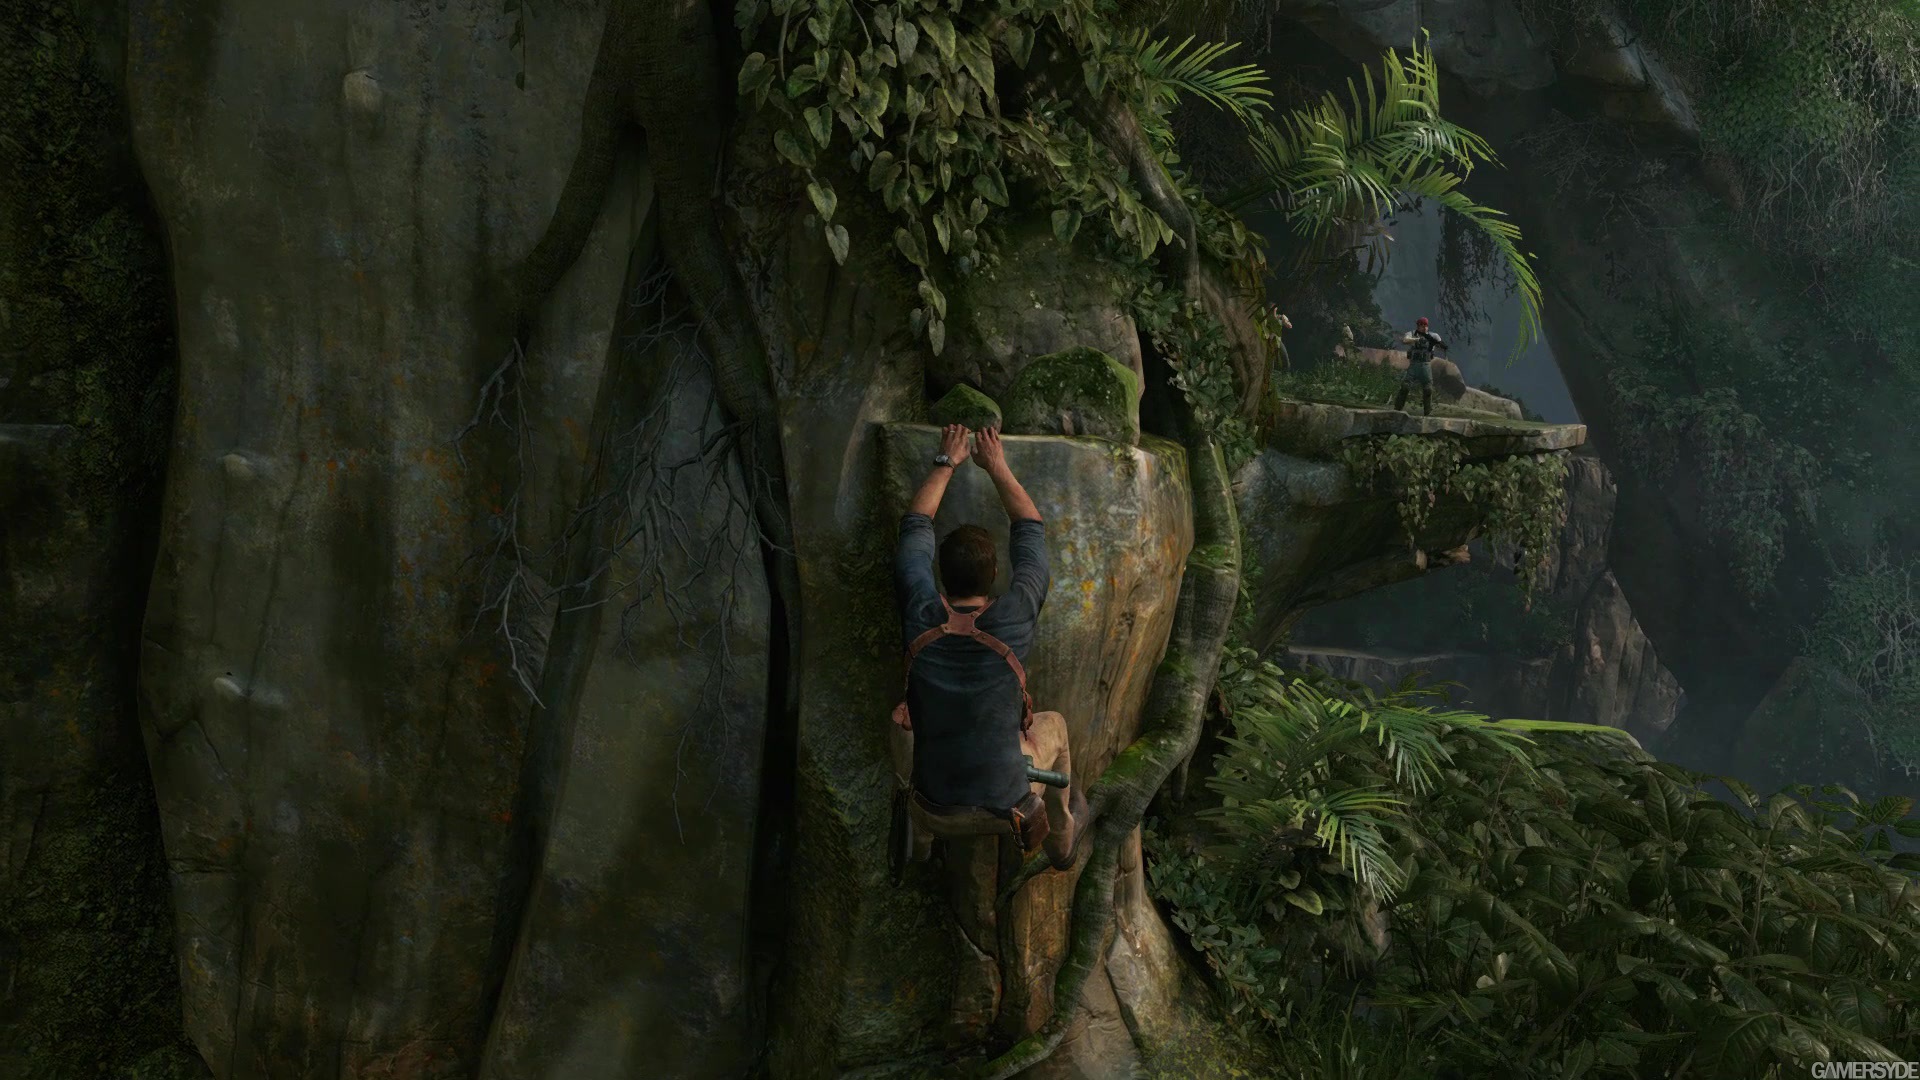 image_uncharted_4_a_thief_s_end-27145-2995_0014.jpg